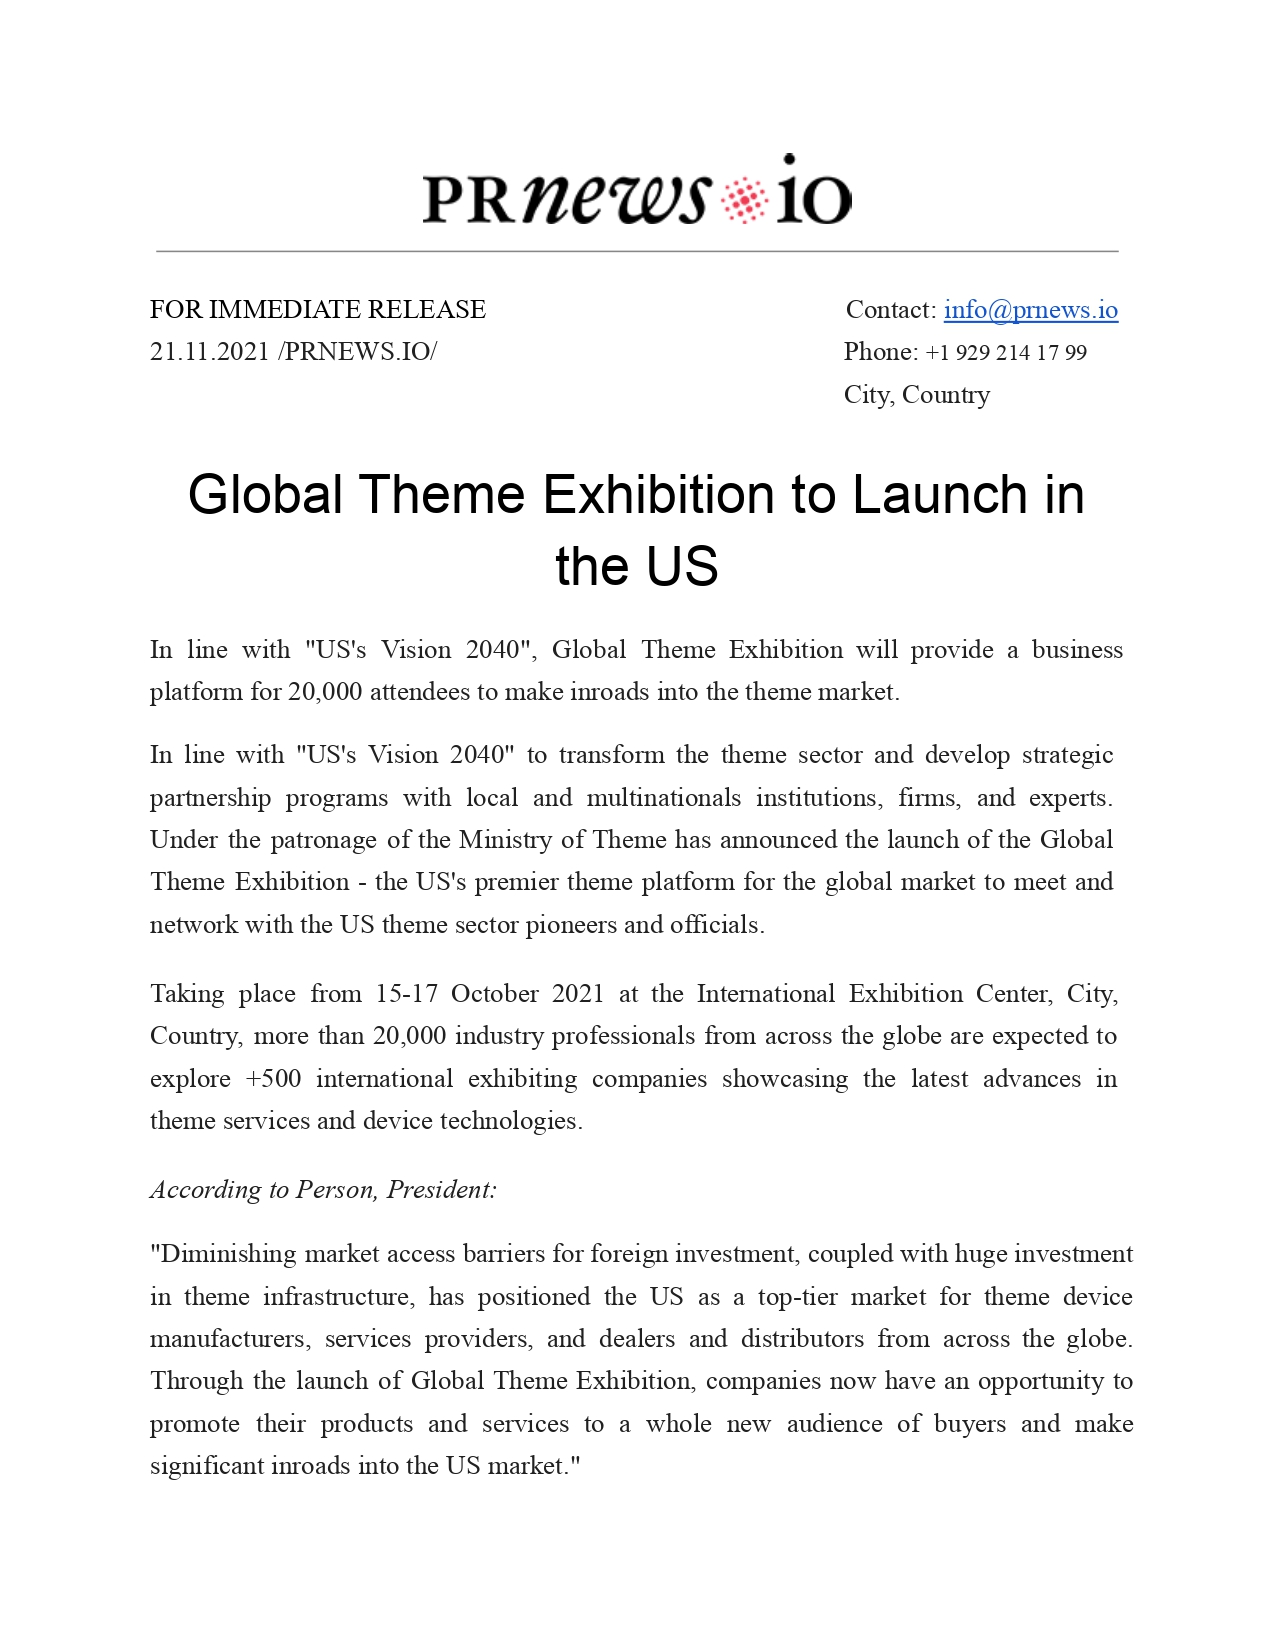 Event Press Release Example